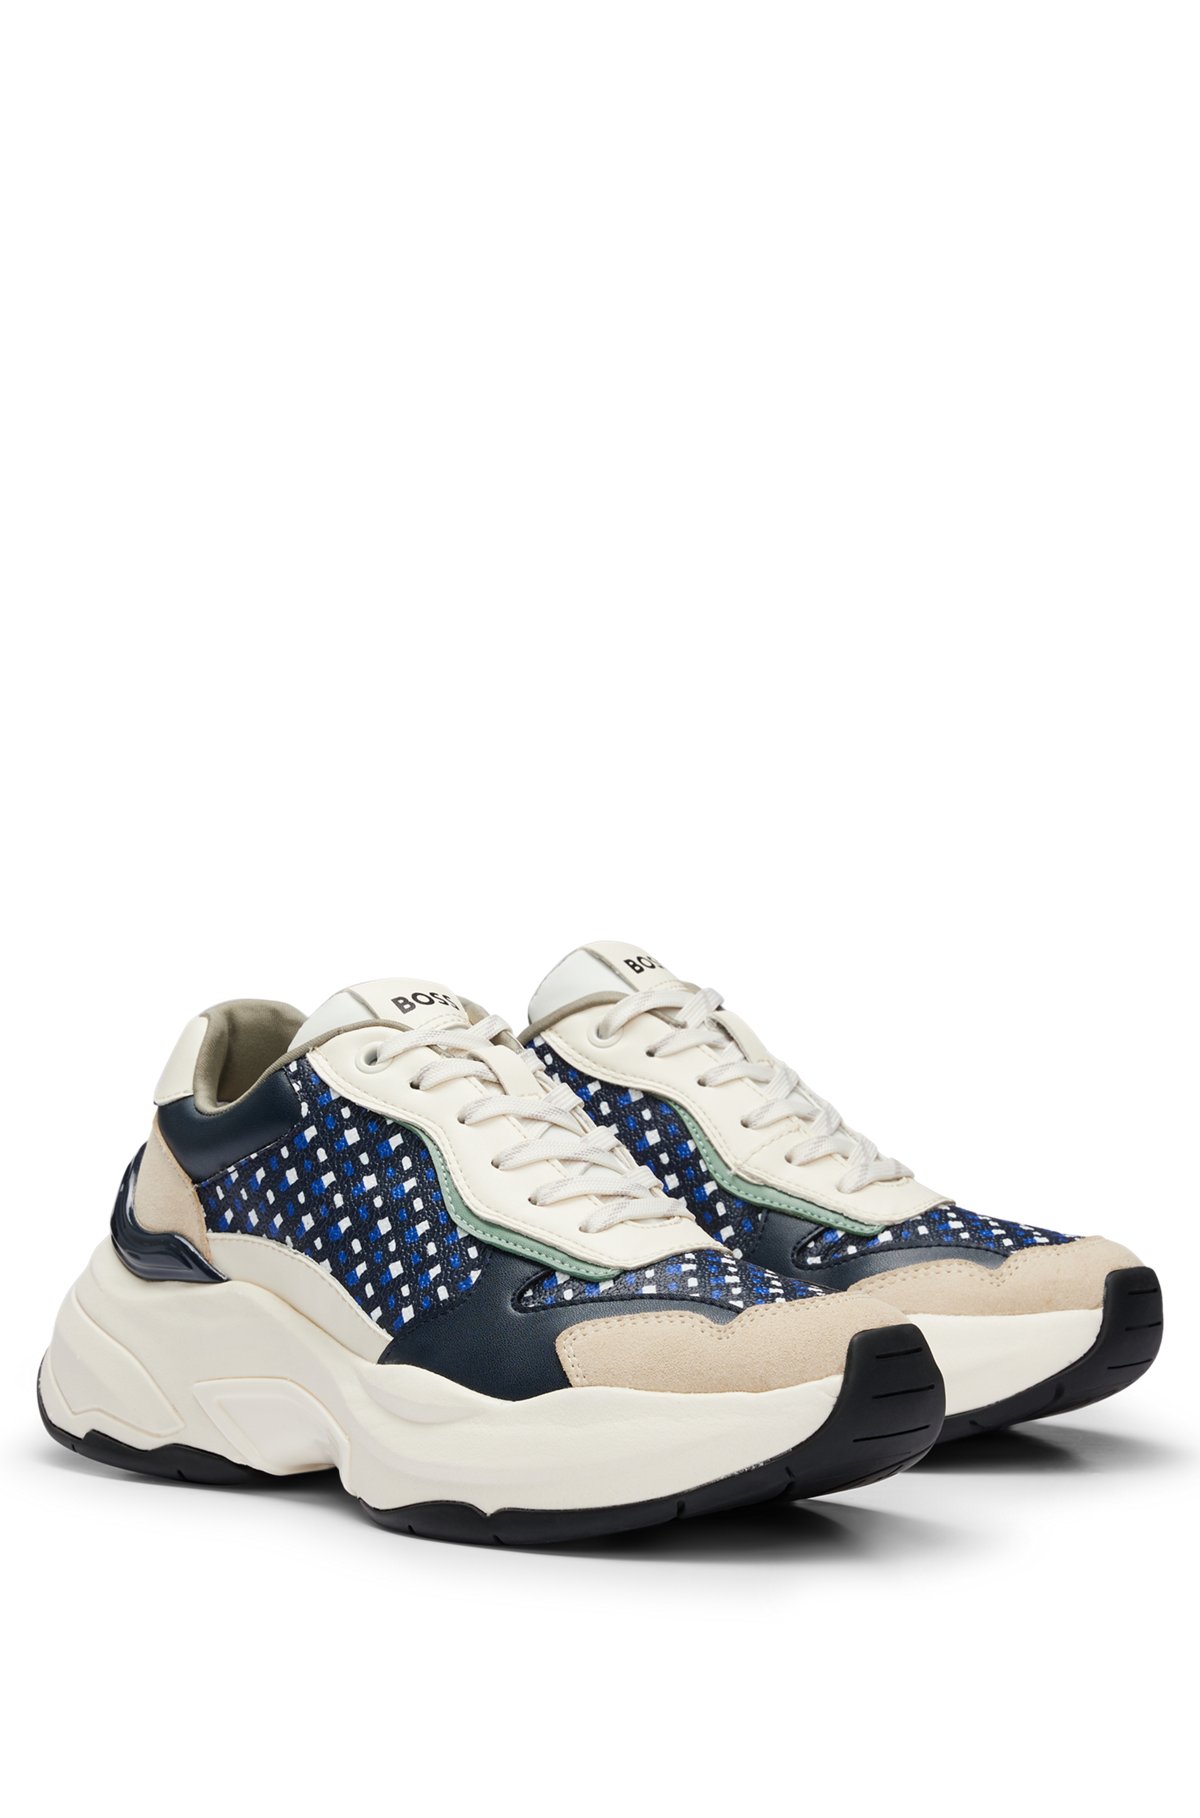 Chunky trainers with bonded leather and a monogrammed panel, Patterned